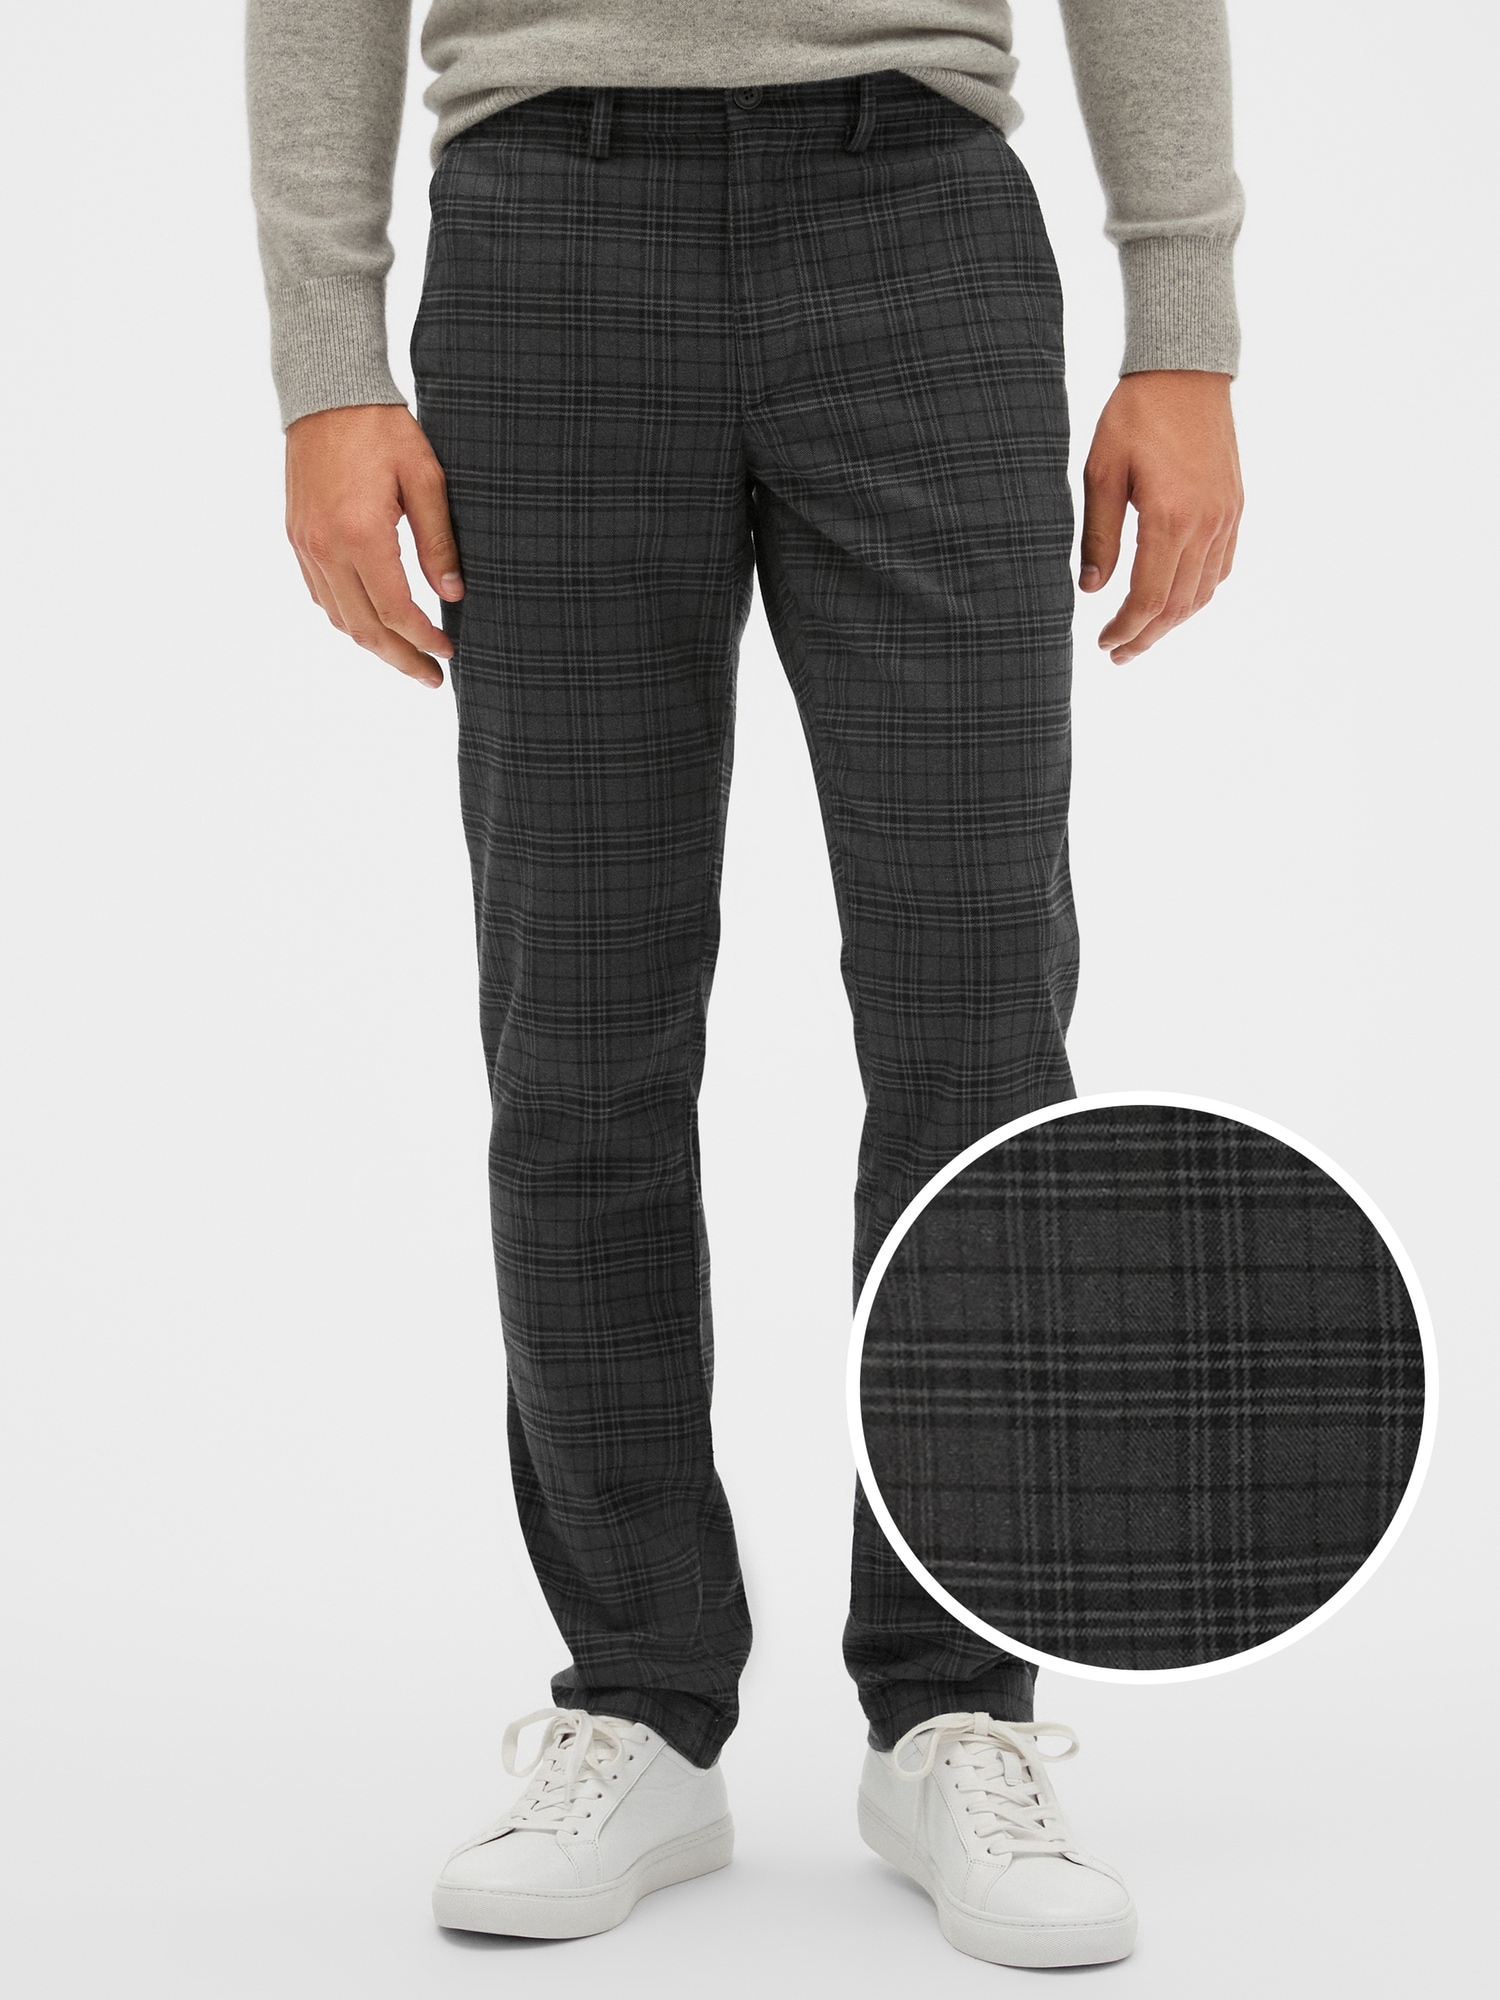 Twill Pants in Slim Fit with GapFlex | Gap Factory